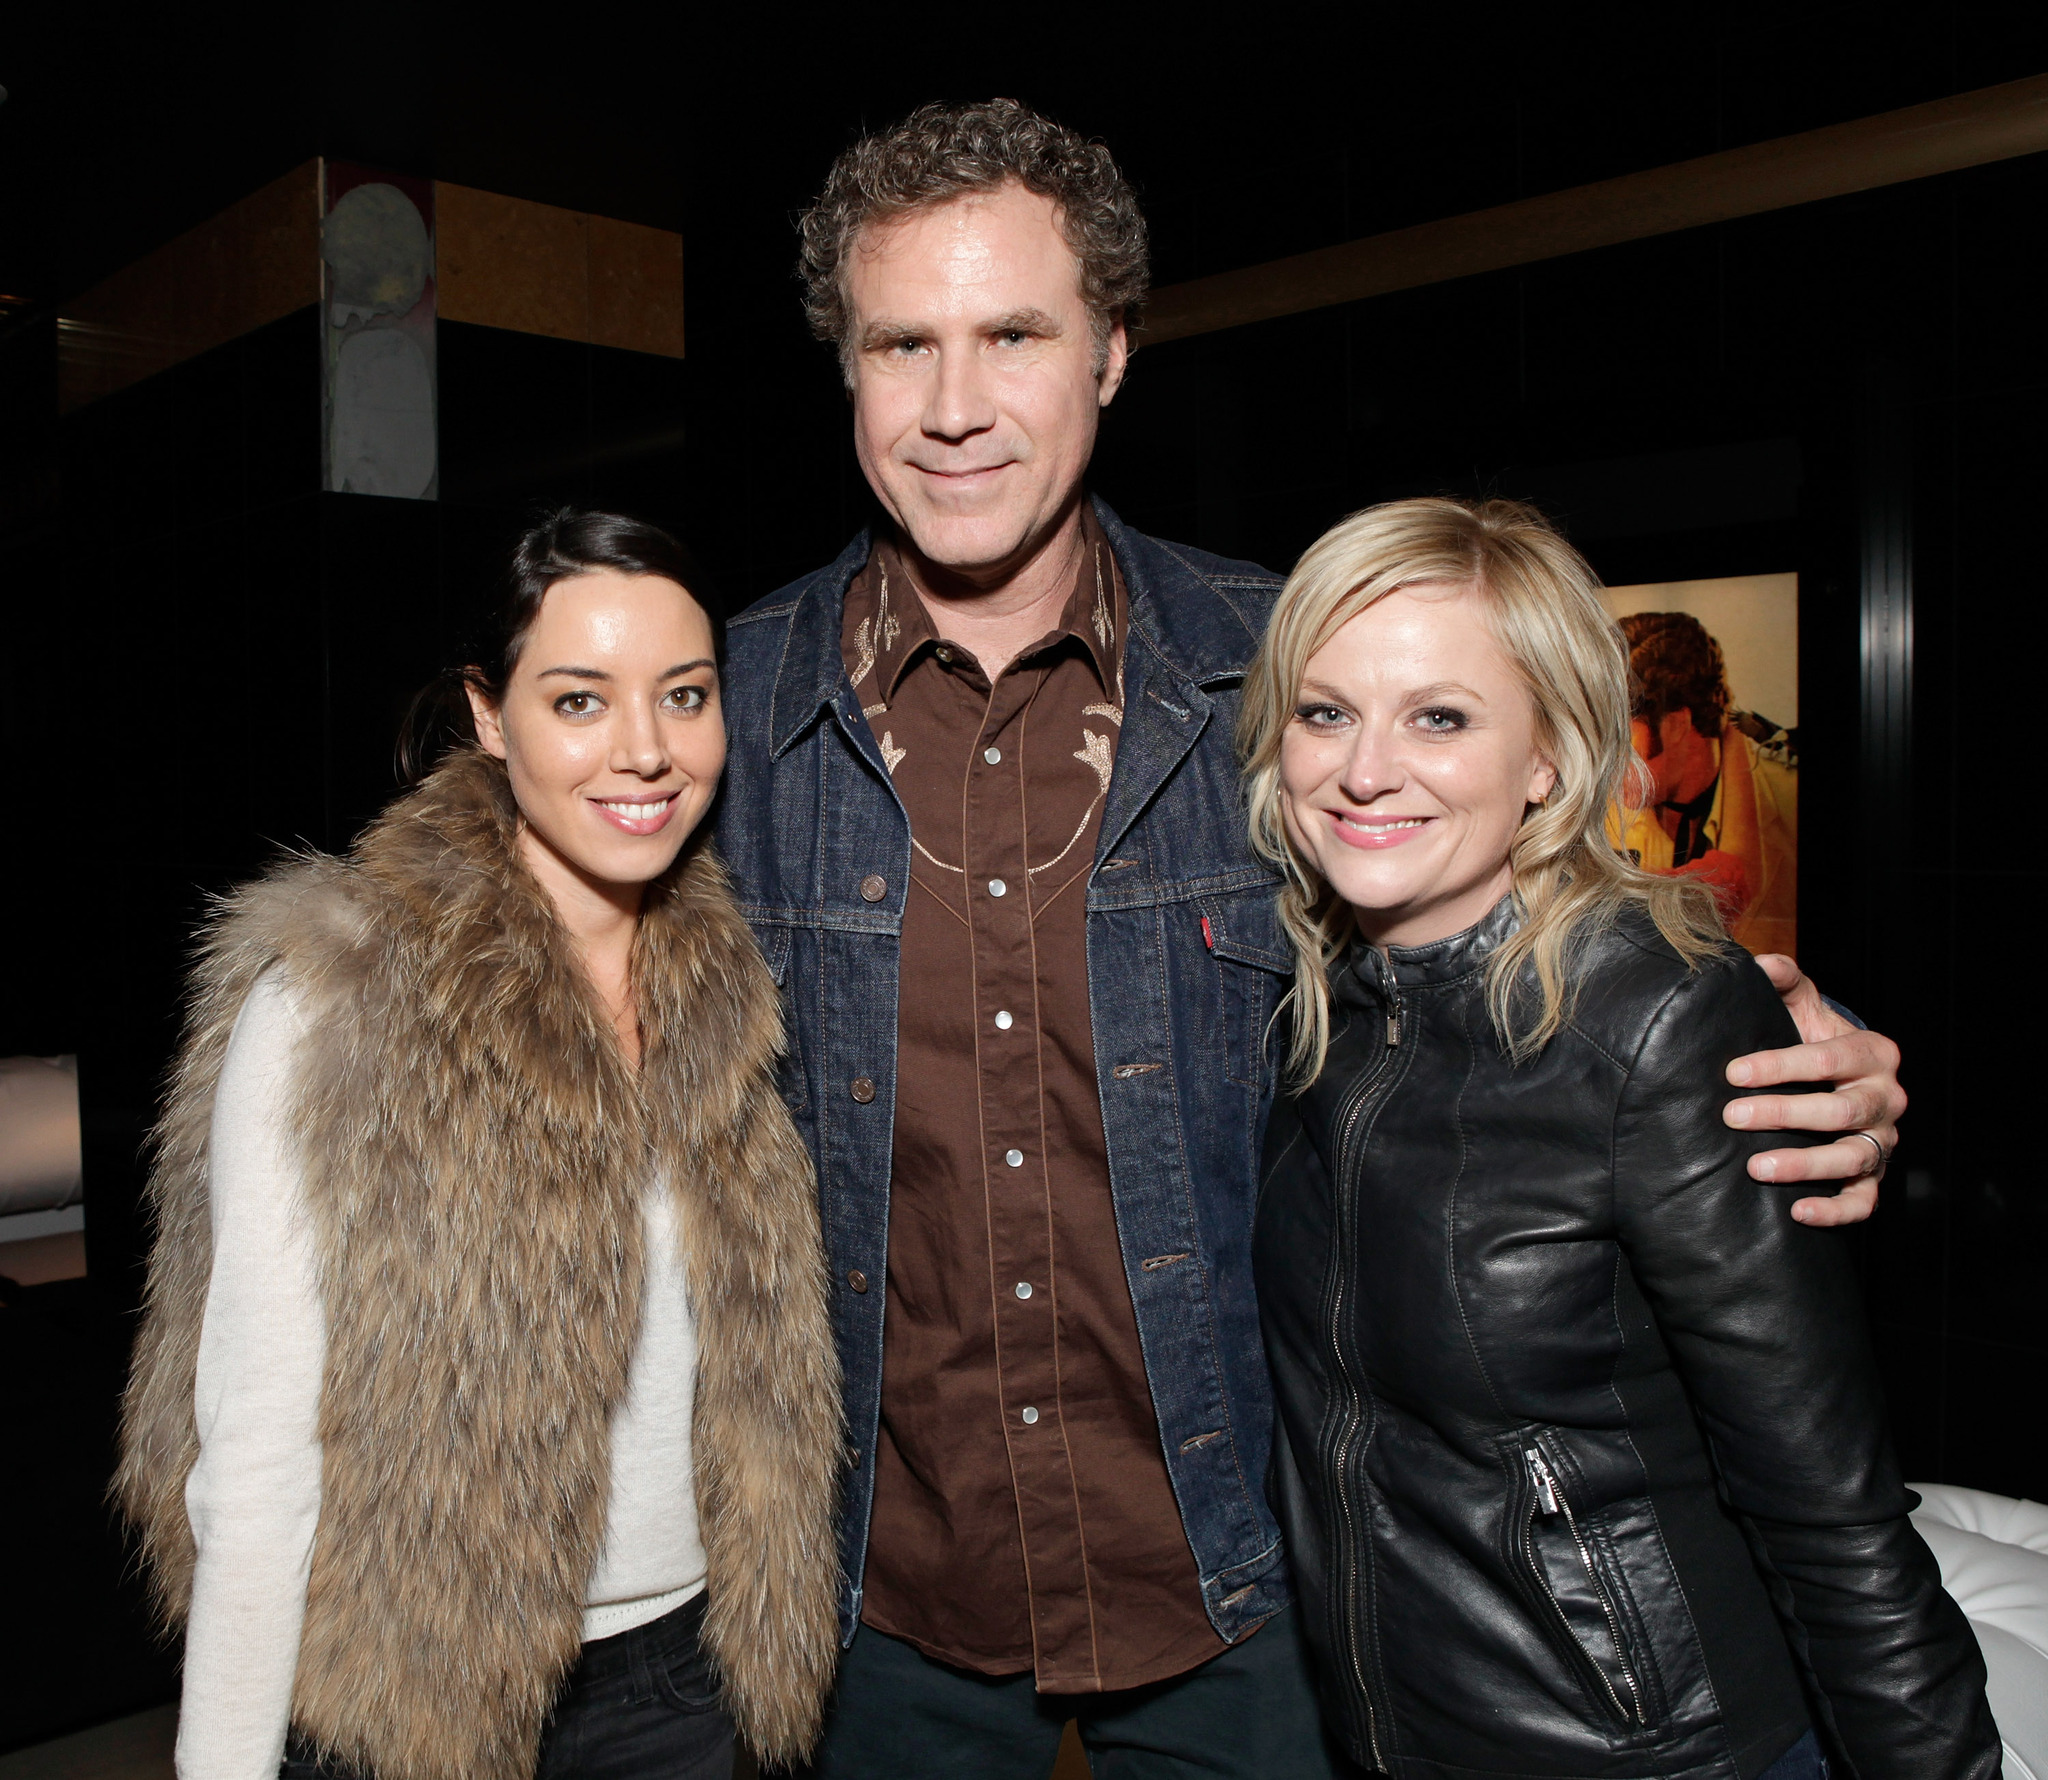 Will Ferrell, Amy Poehler and Aubrey Plaza at event of Casa de mi Padre (2012)